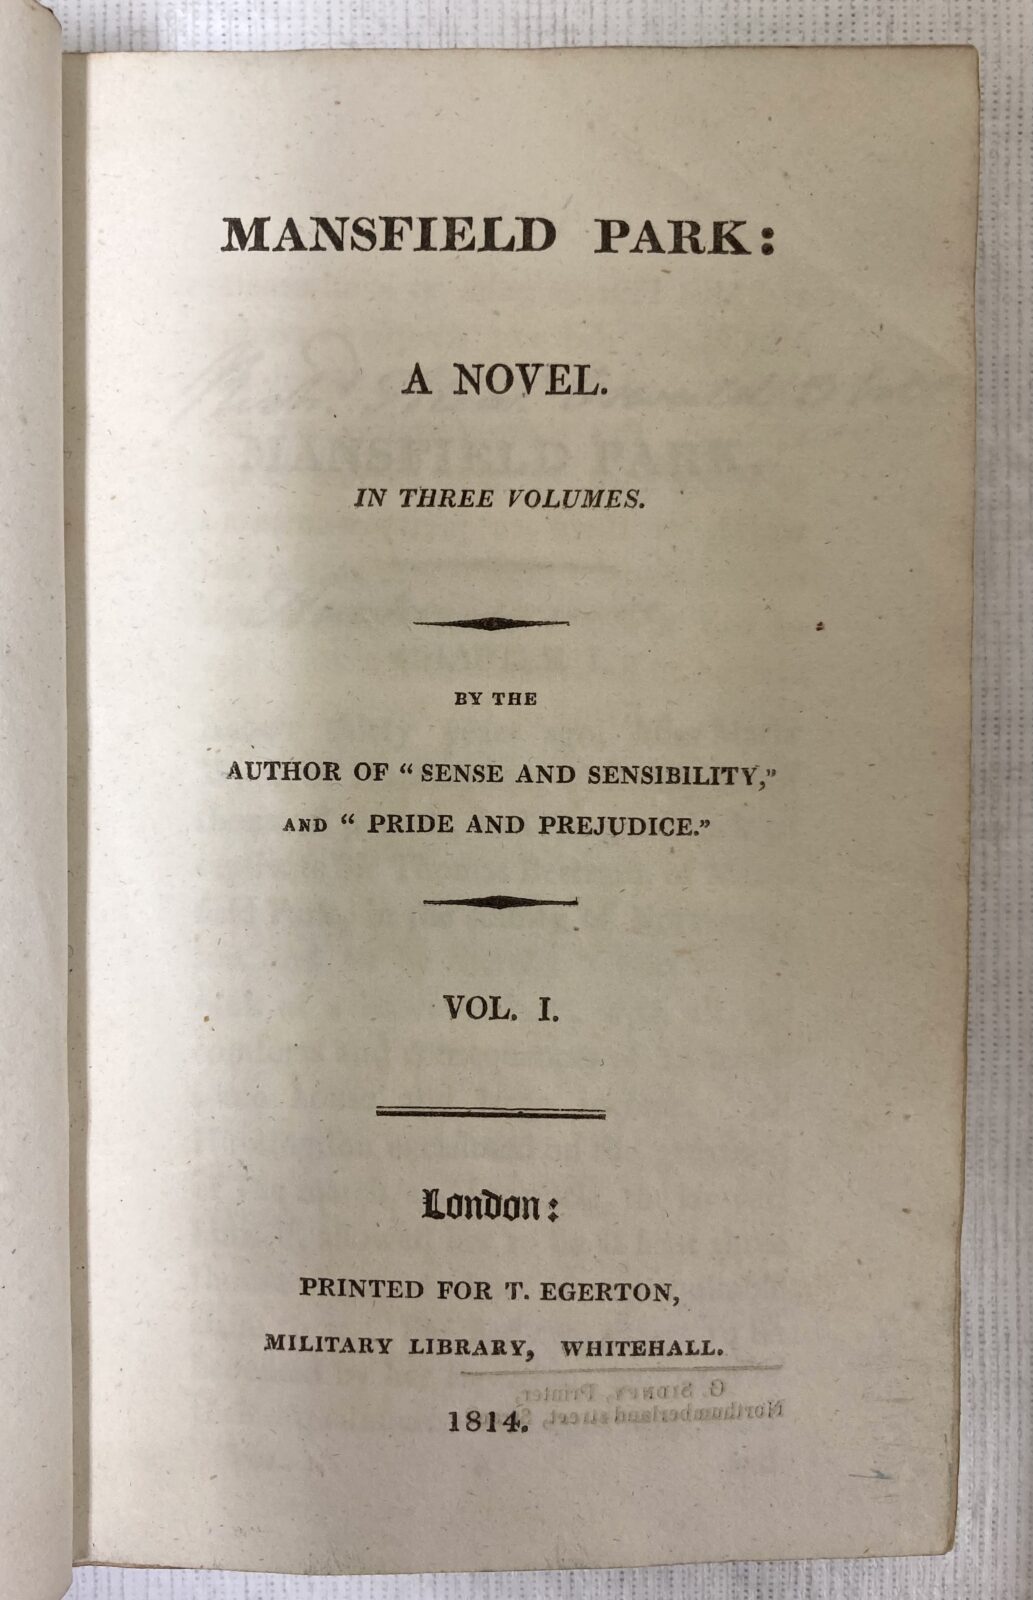 Title page of Mansfield Park first edition, volume 1